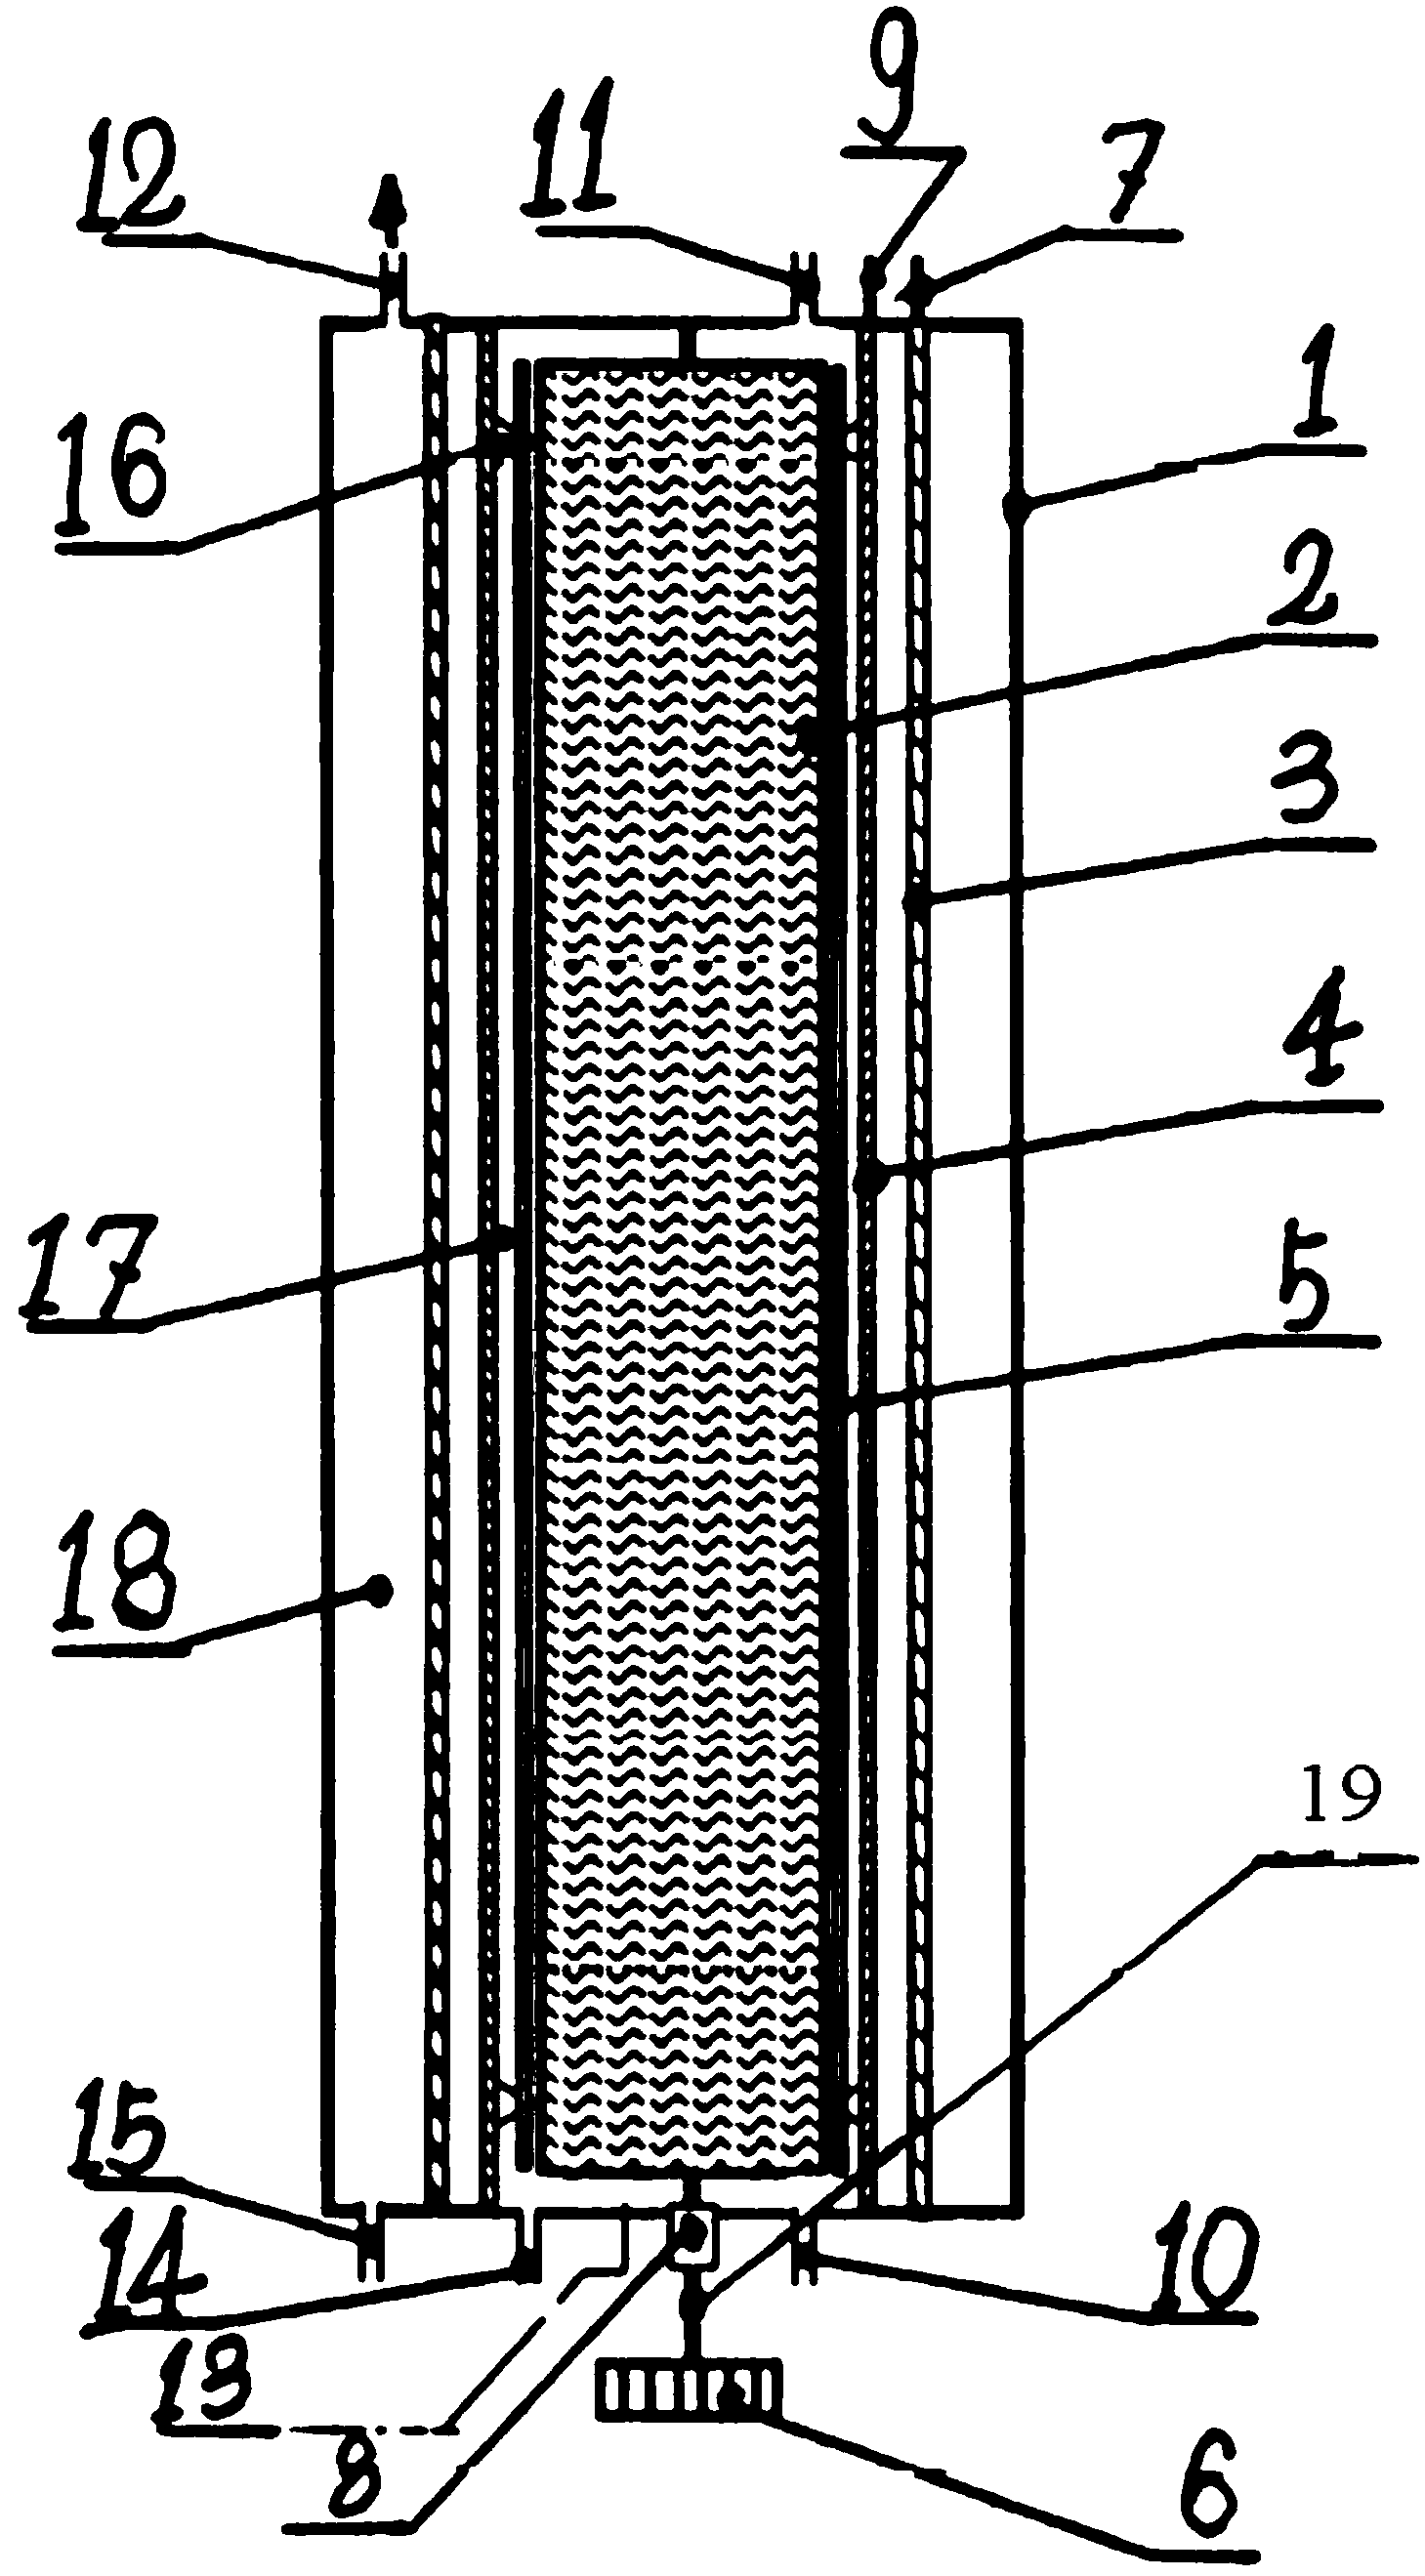 Electrochemical water scale removal device